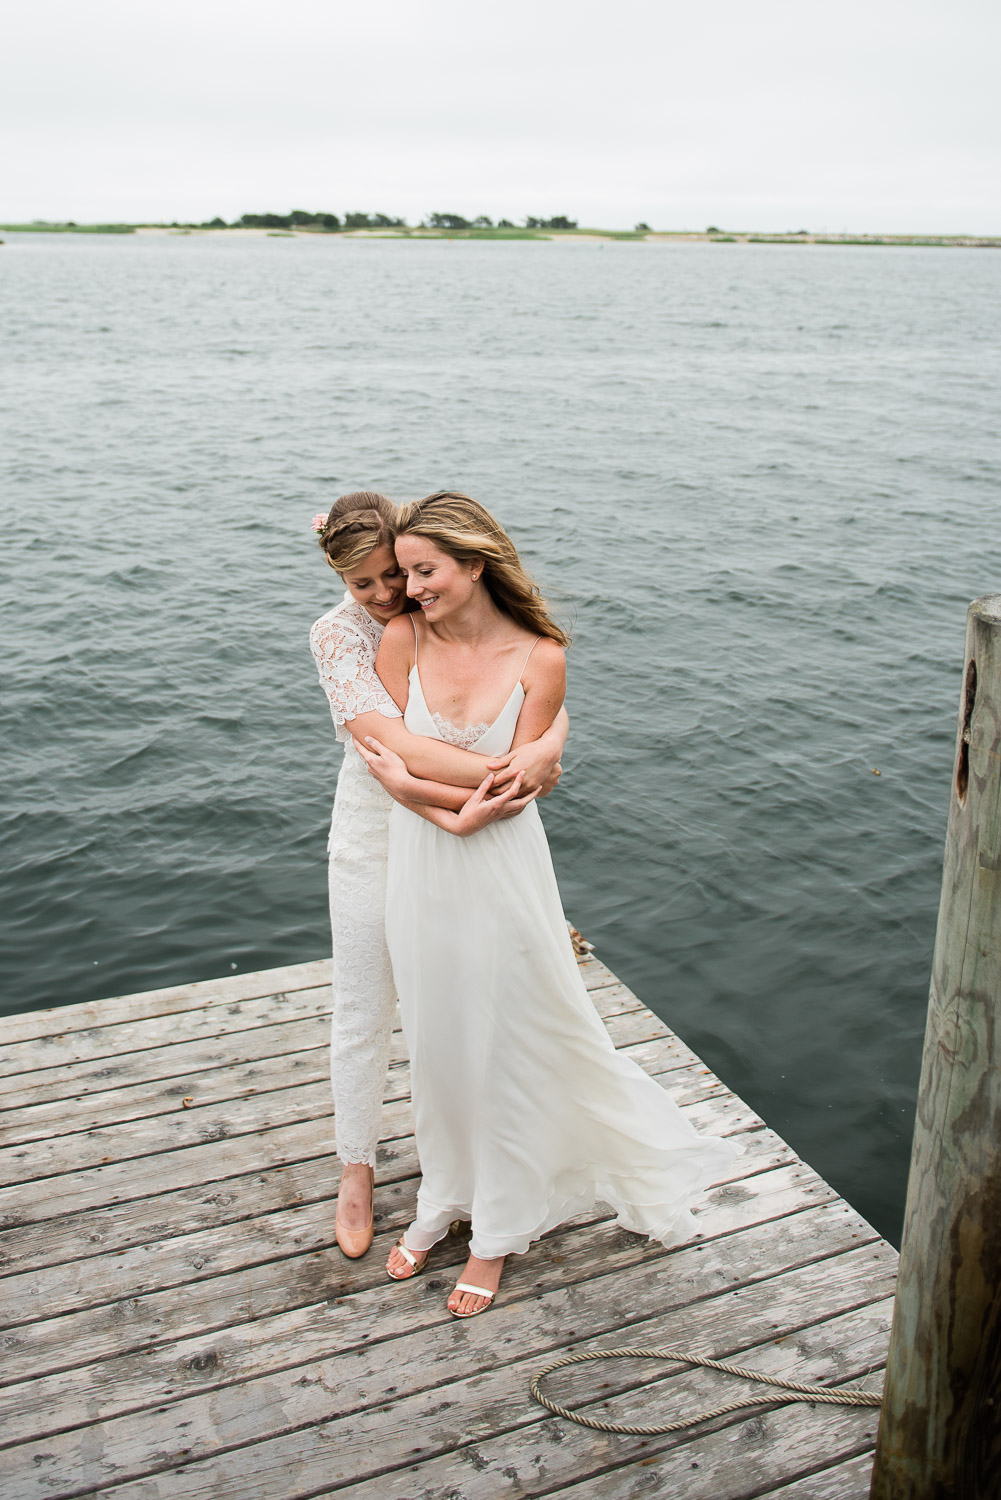 brides embracing on a dock in front of the water on Cape Cod